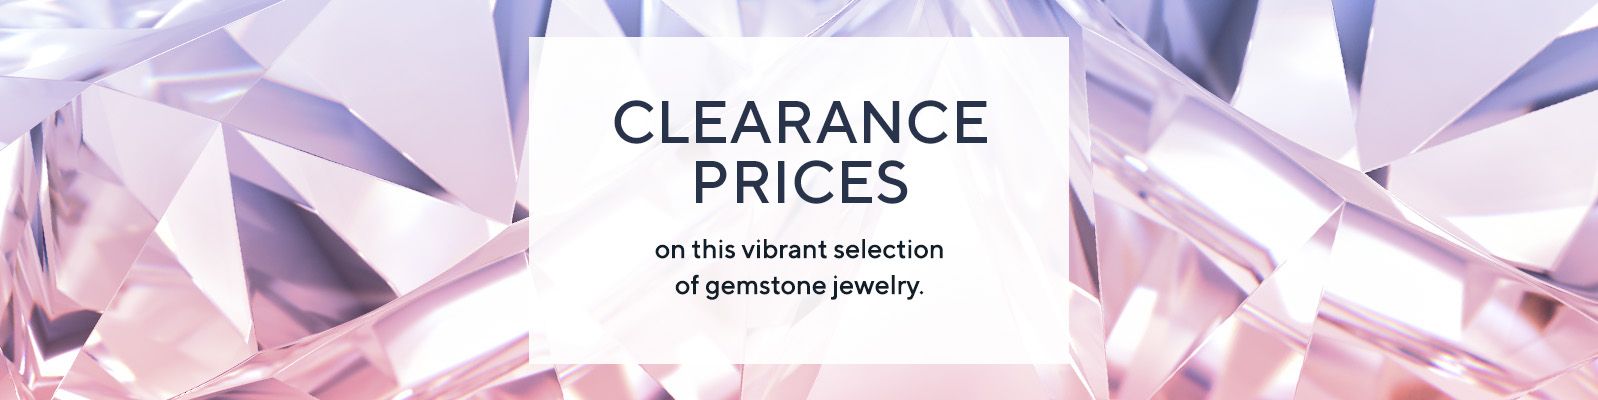 Clearance Prices on this vibrant selection of gemstone jewelry. 